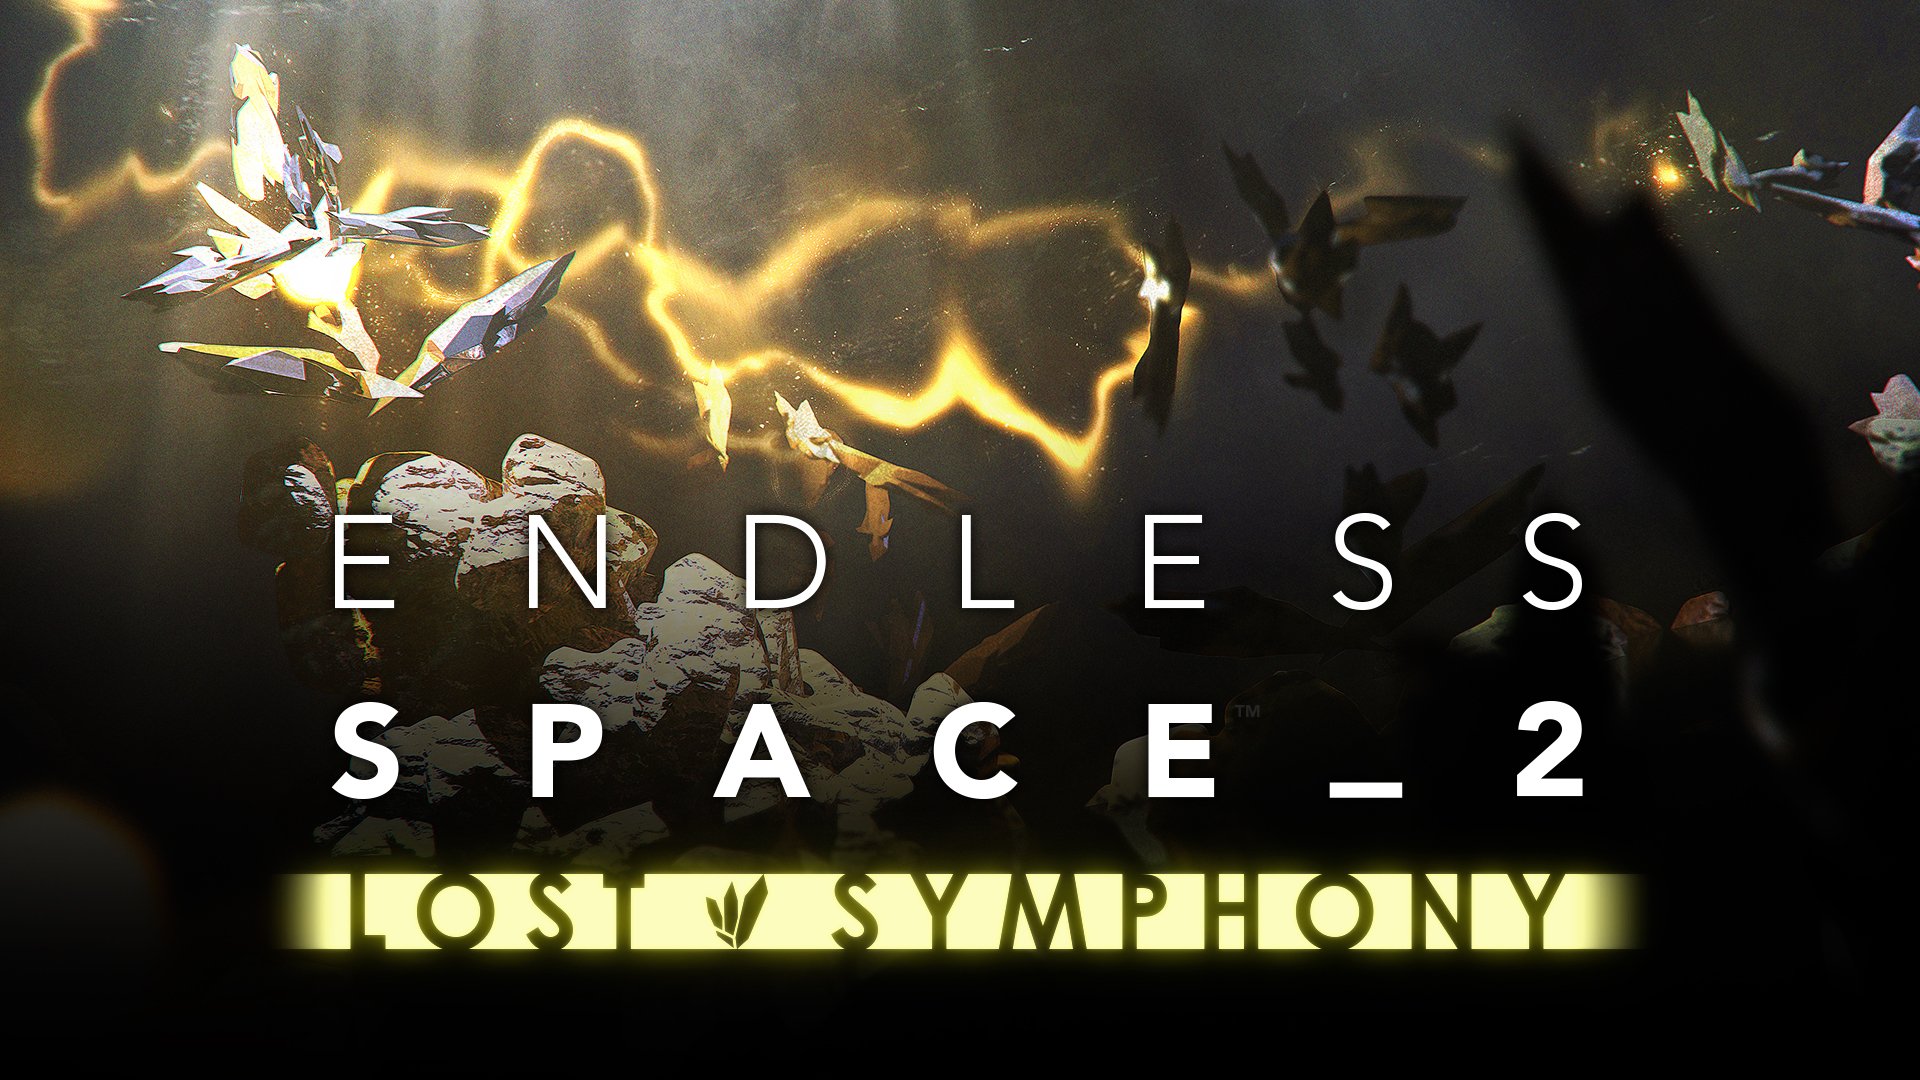 Endless Space 2 Lost Symphony 1